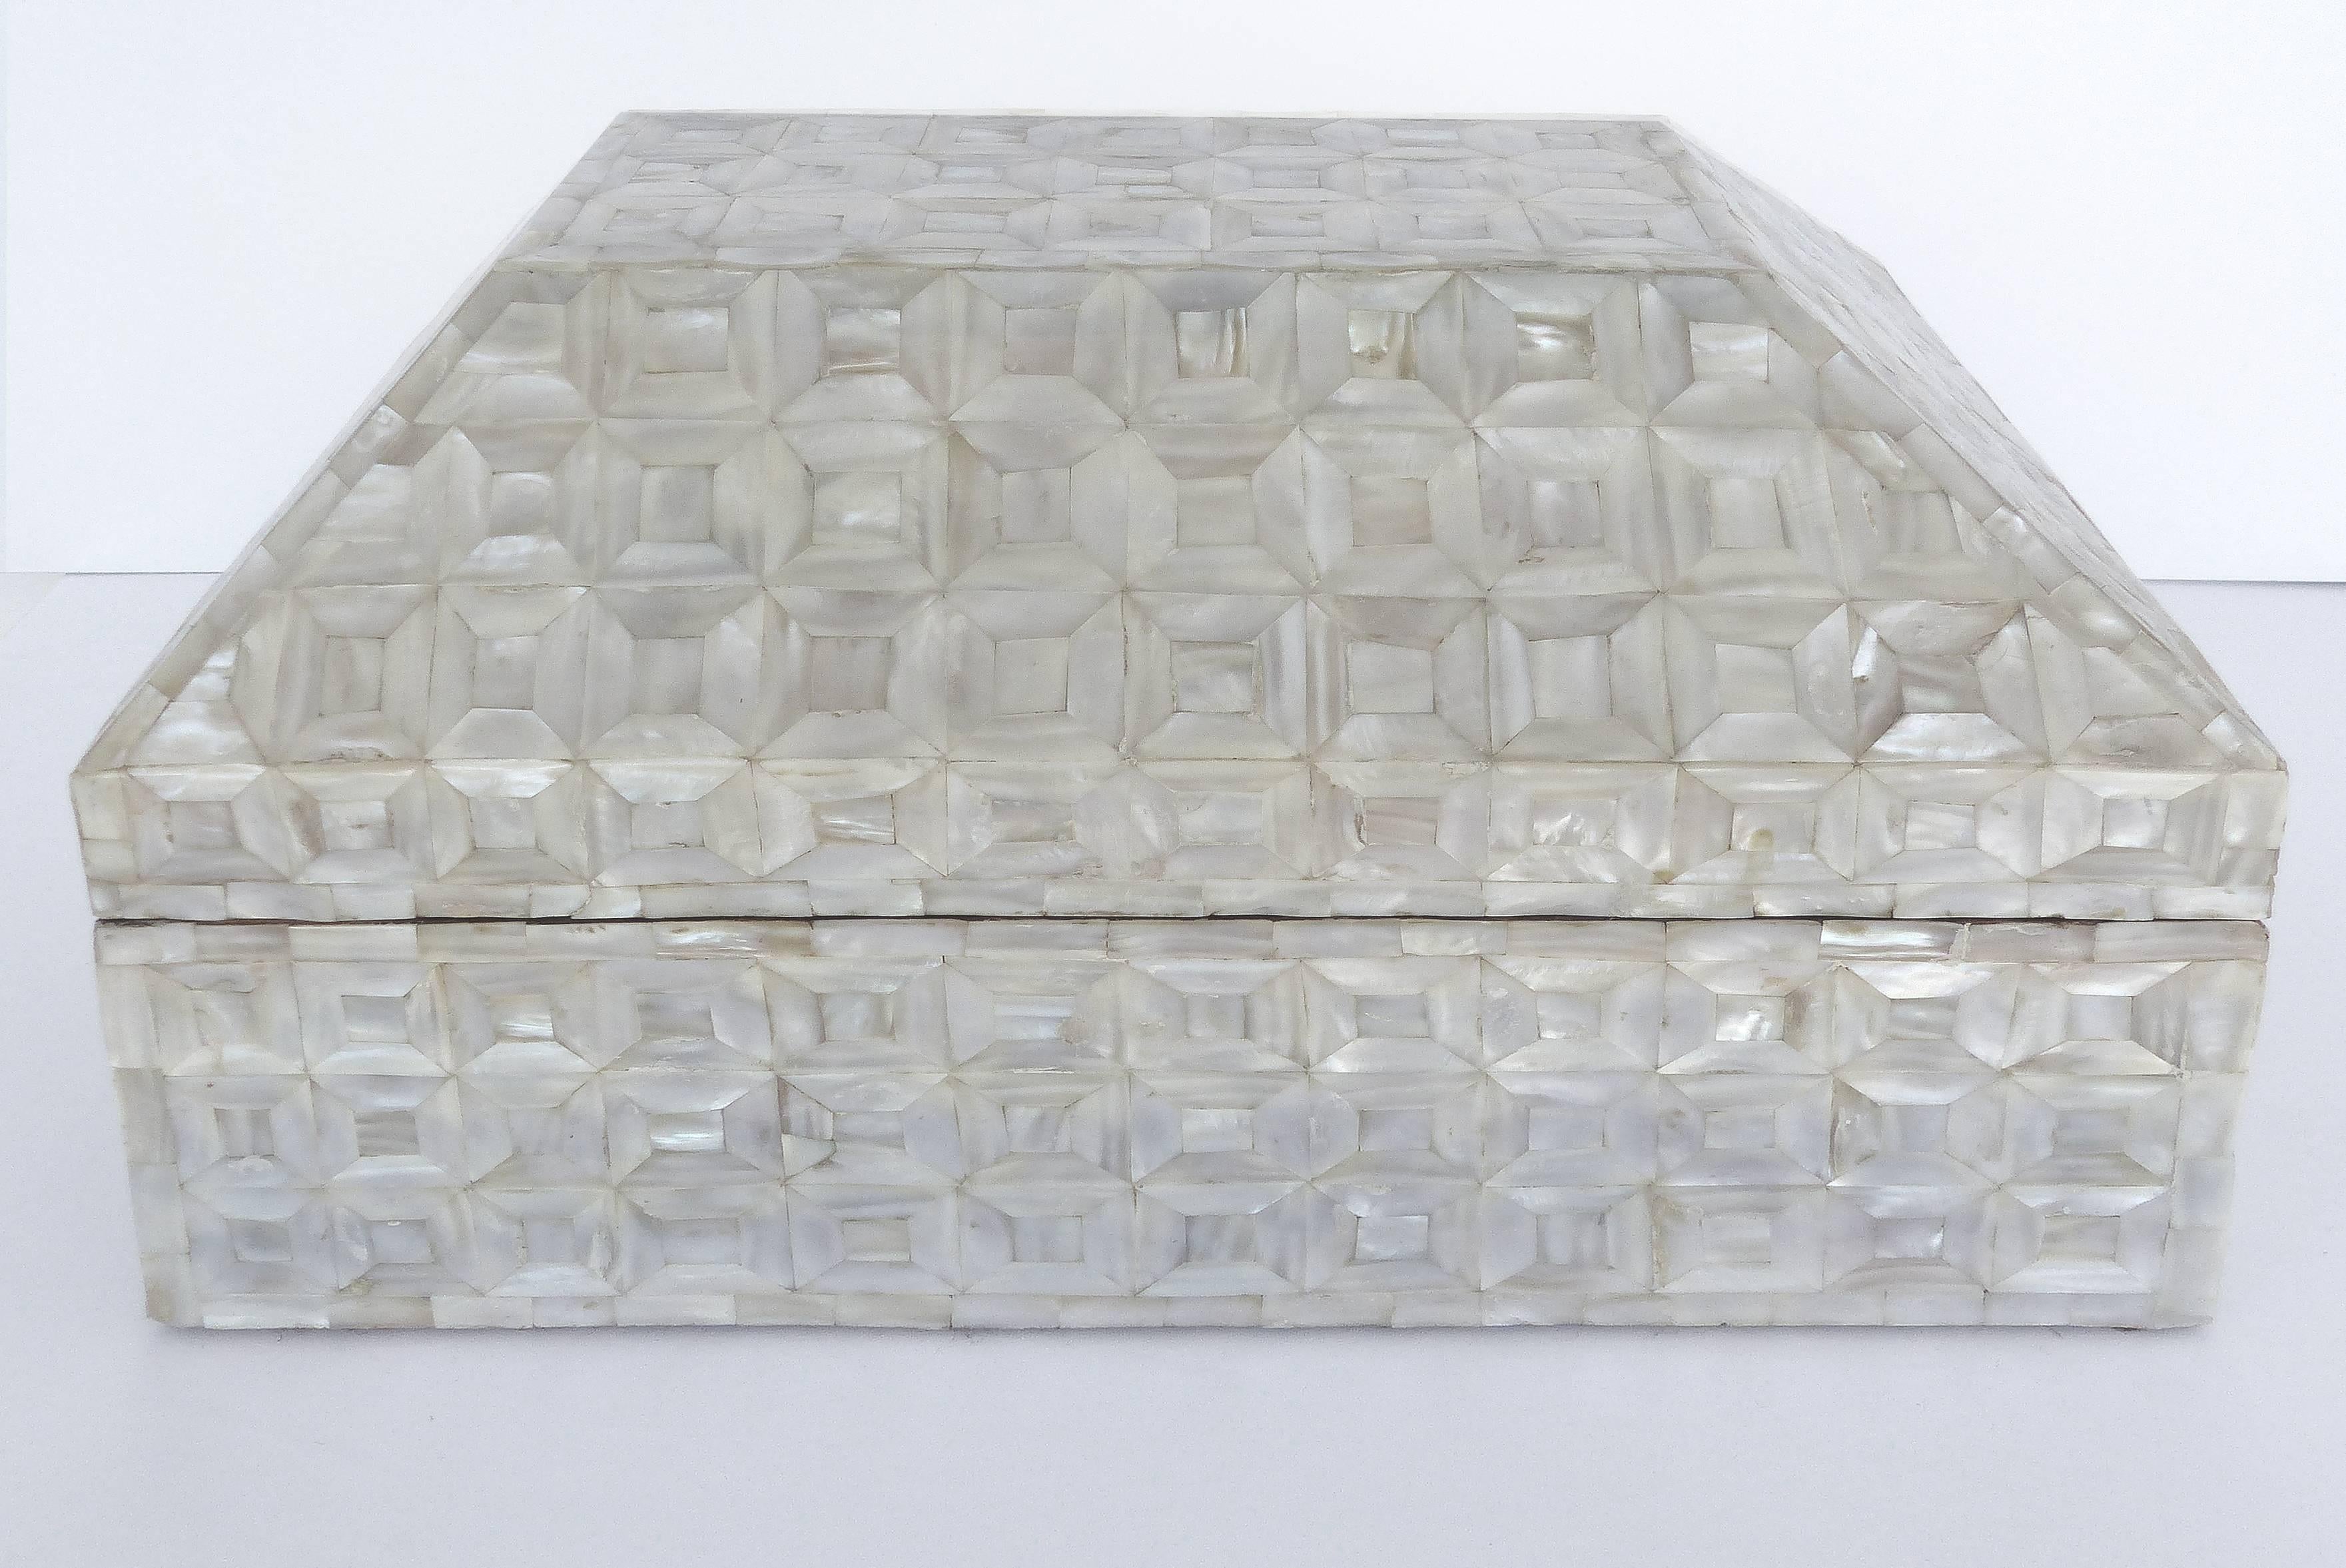 Offered for sale is a large mother-of-pearl tessellated wood hinged box. Possibly from the Phillipines, this box has an intricate inlay pattern and it has a coffered form lid.